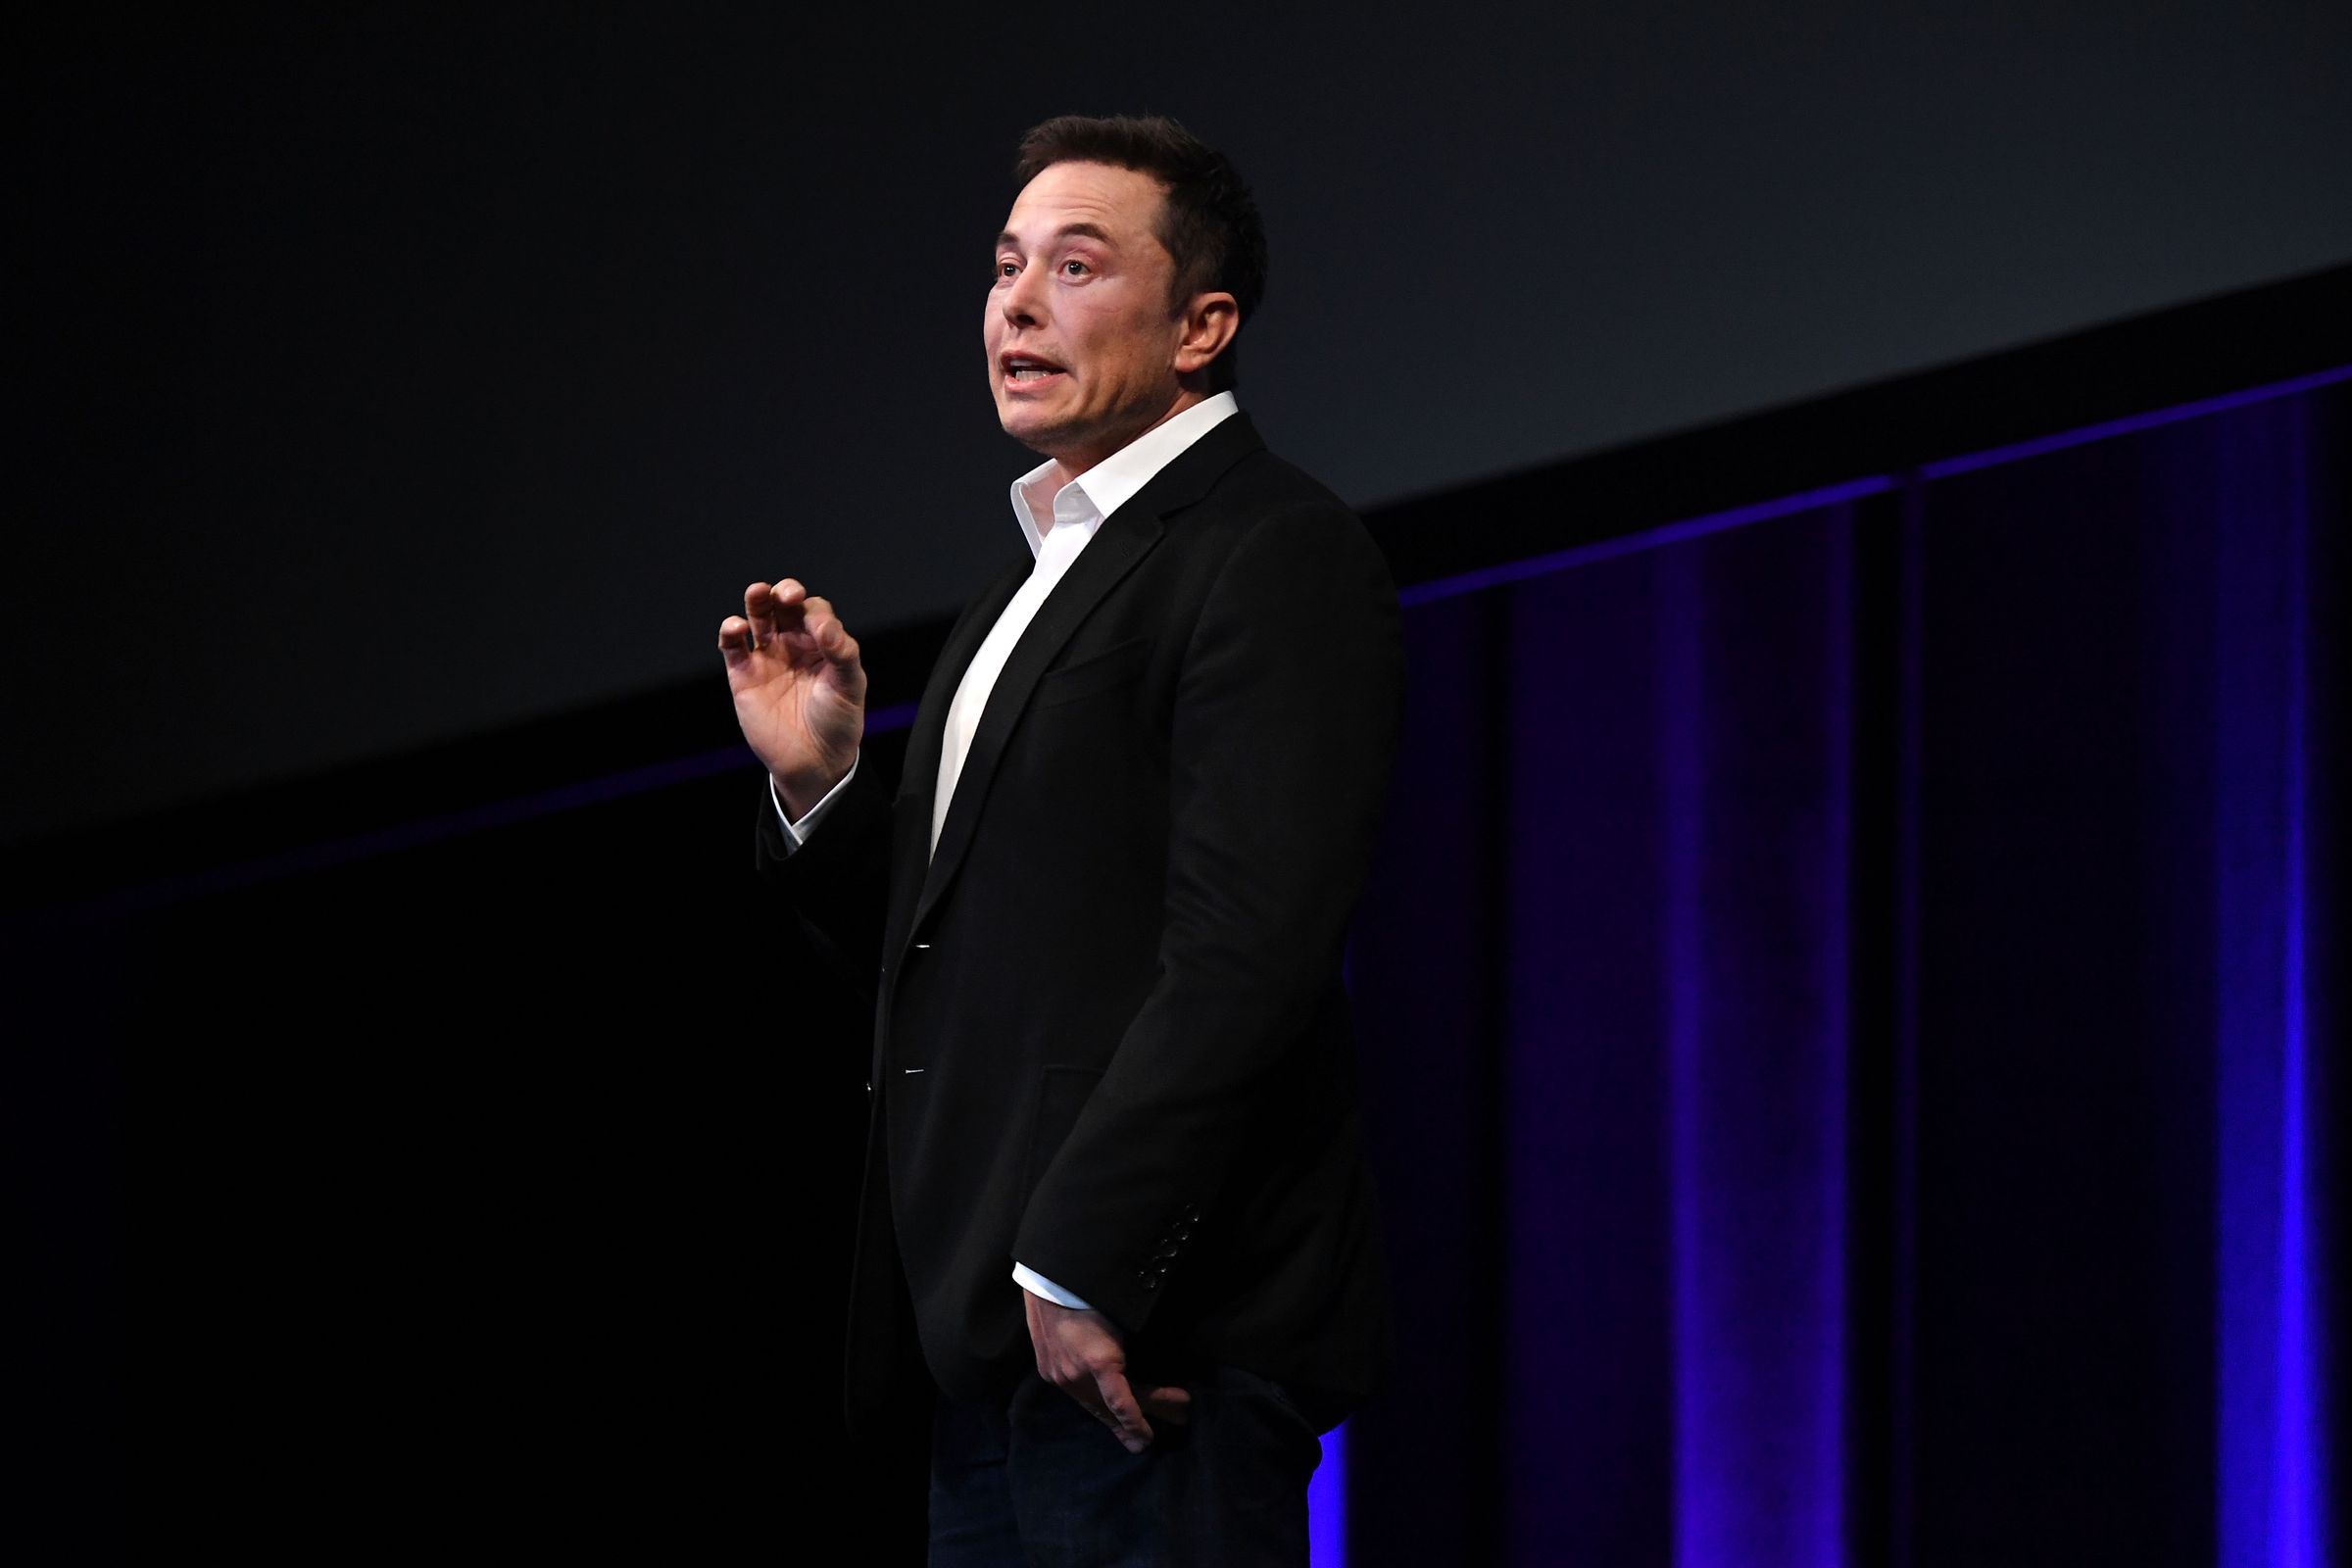 Elon Musk Presents SpaceX Plans To Colonise Mars